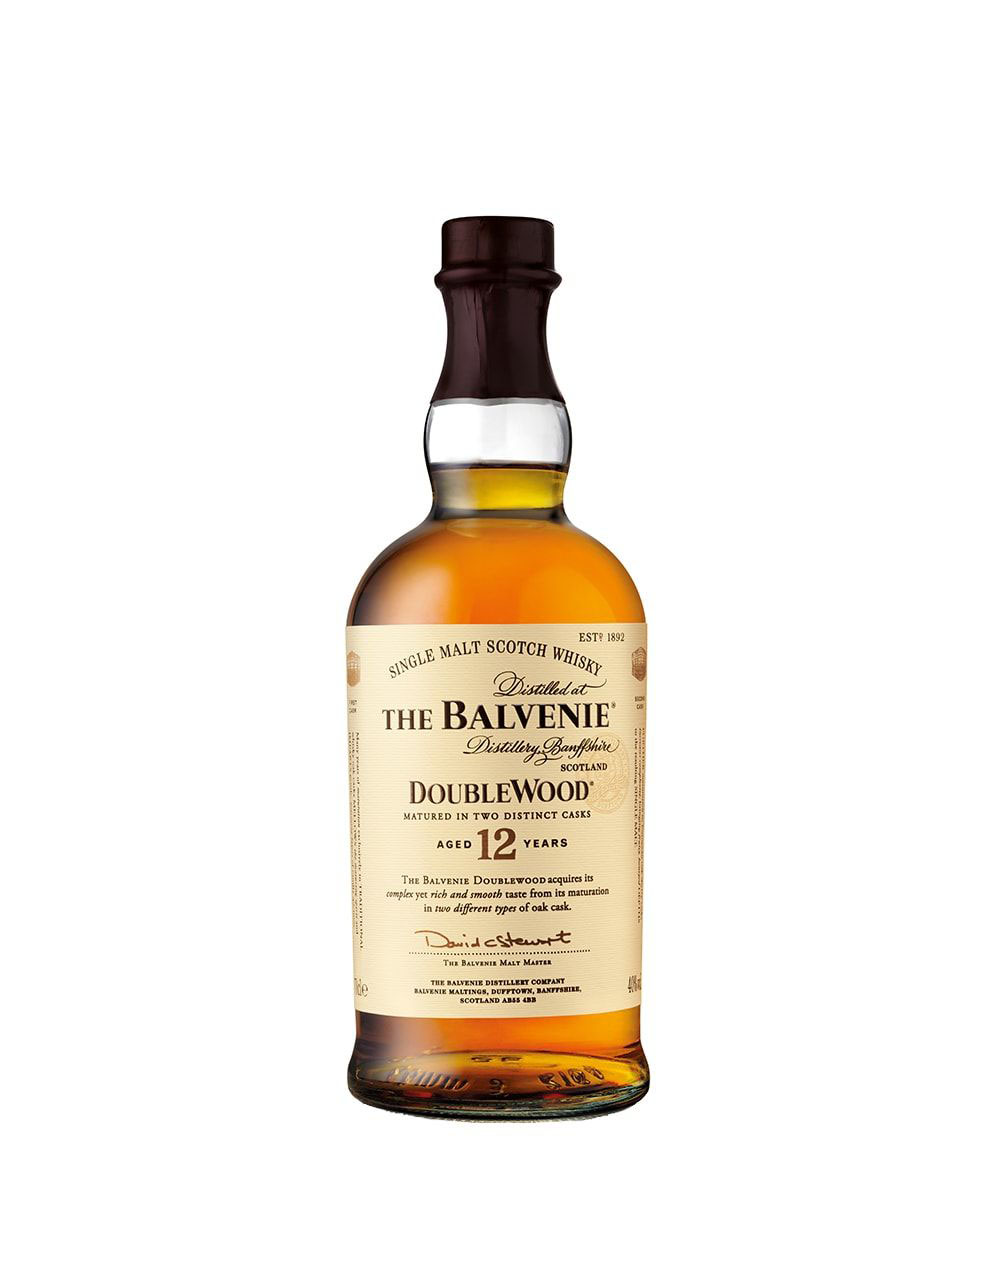 The Balvenie DoubleWood Aged 12 Years